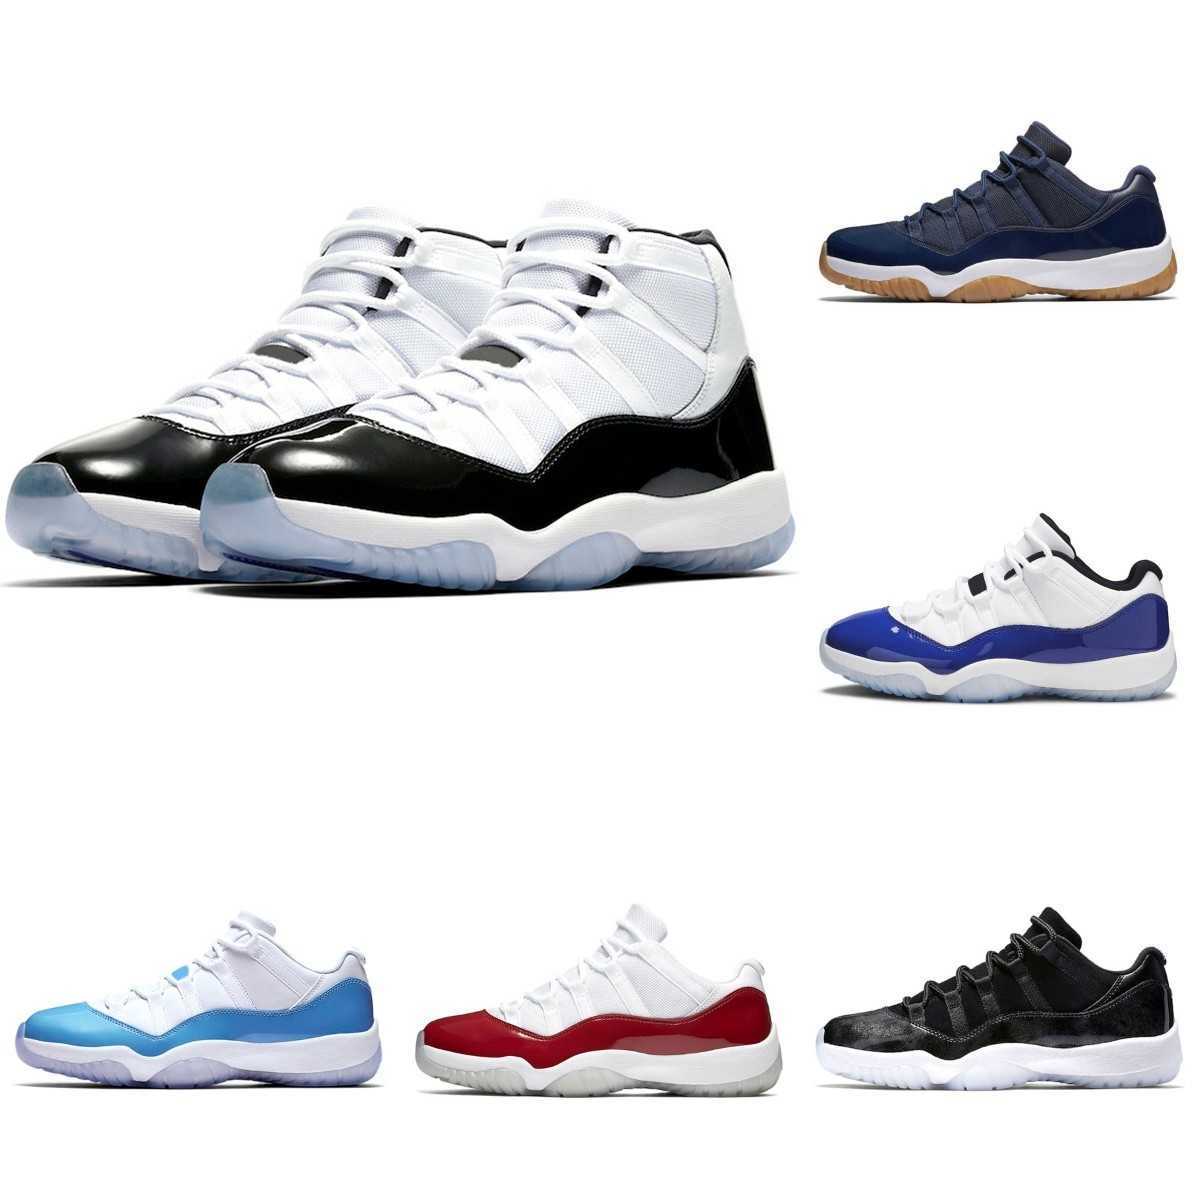 

Shoes Basketball Jumpman 11 Trainer High Quality 11s Men Women 25th Anniversary Bred Space Jam Win Like Easter Concord 45 Low Columbia Designer Running Shoes, #3 concord blue